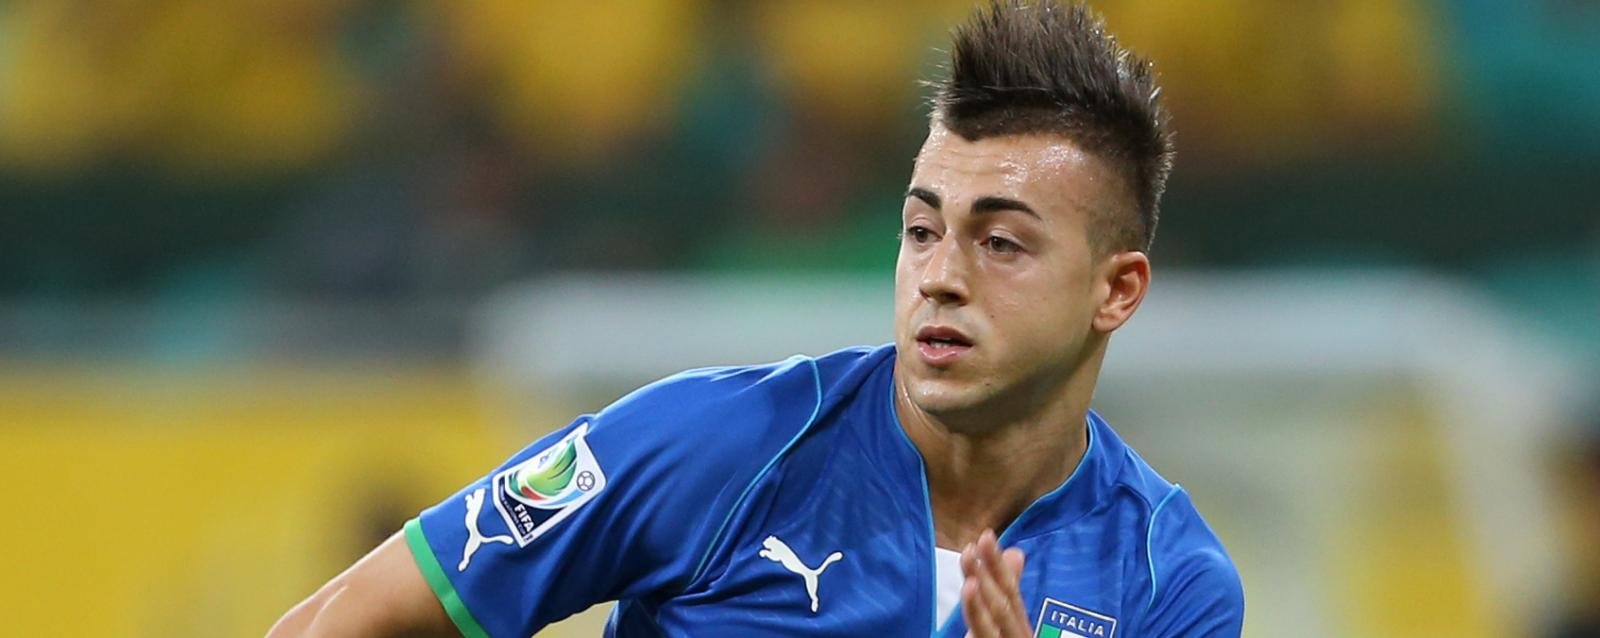 West Ham line-up audacious £10m loan move for exciting Serie A forward